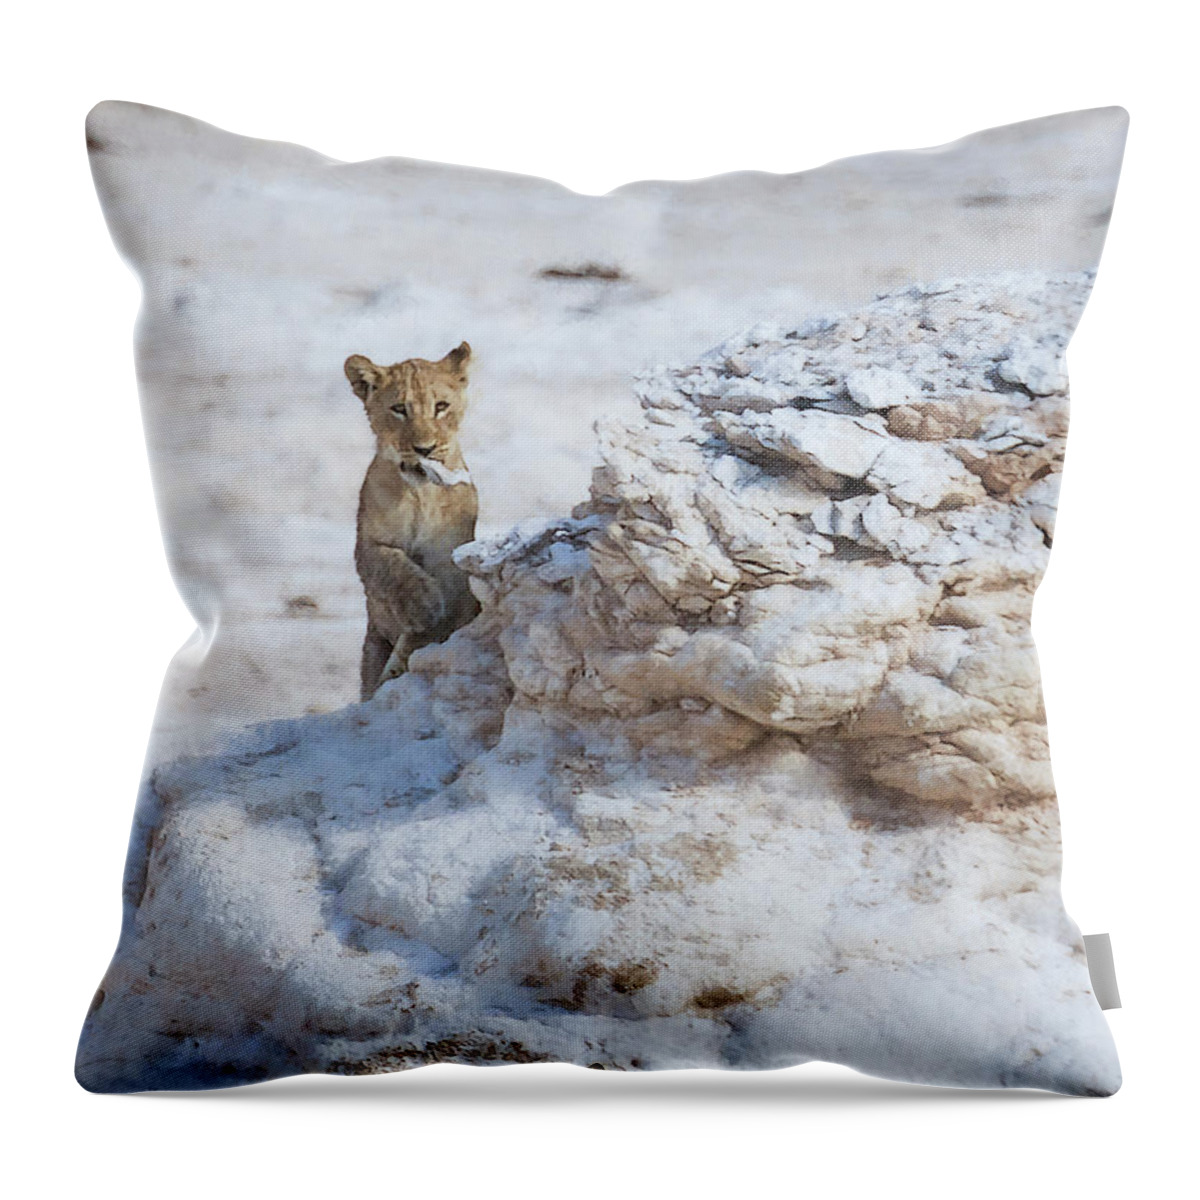 Lion Throw Pillow featuring the photograph Why Nap When You Can Play, No. 2 by Belinda Greb